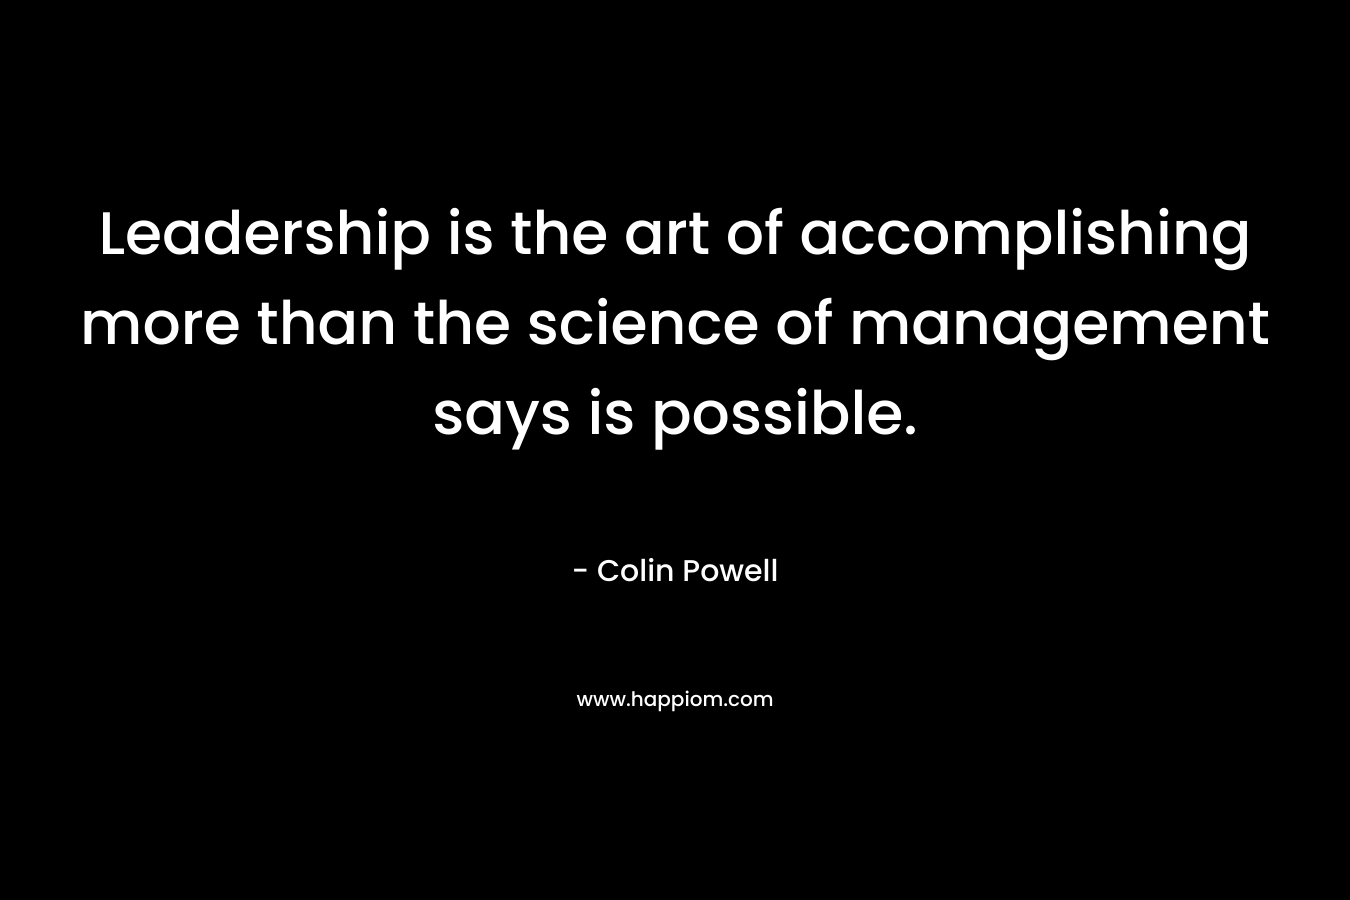 Leadership is the art of accomplishing more than the science of management says is possible. – Colin Powell